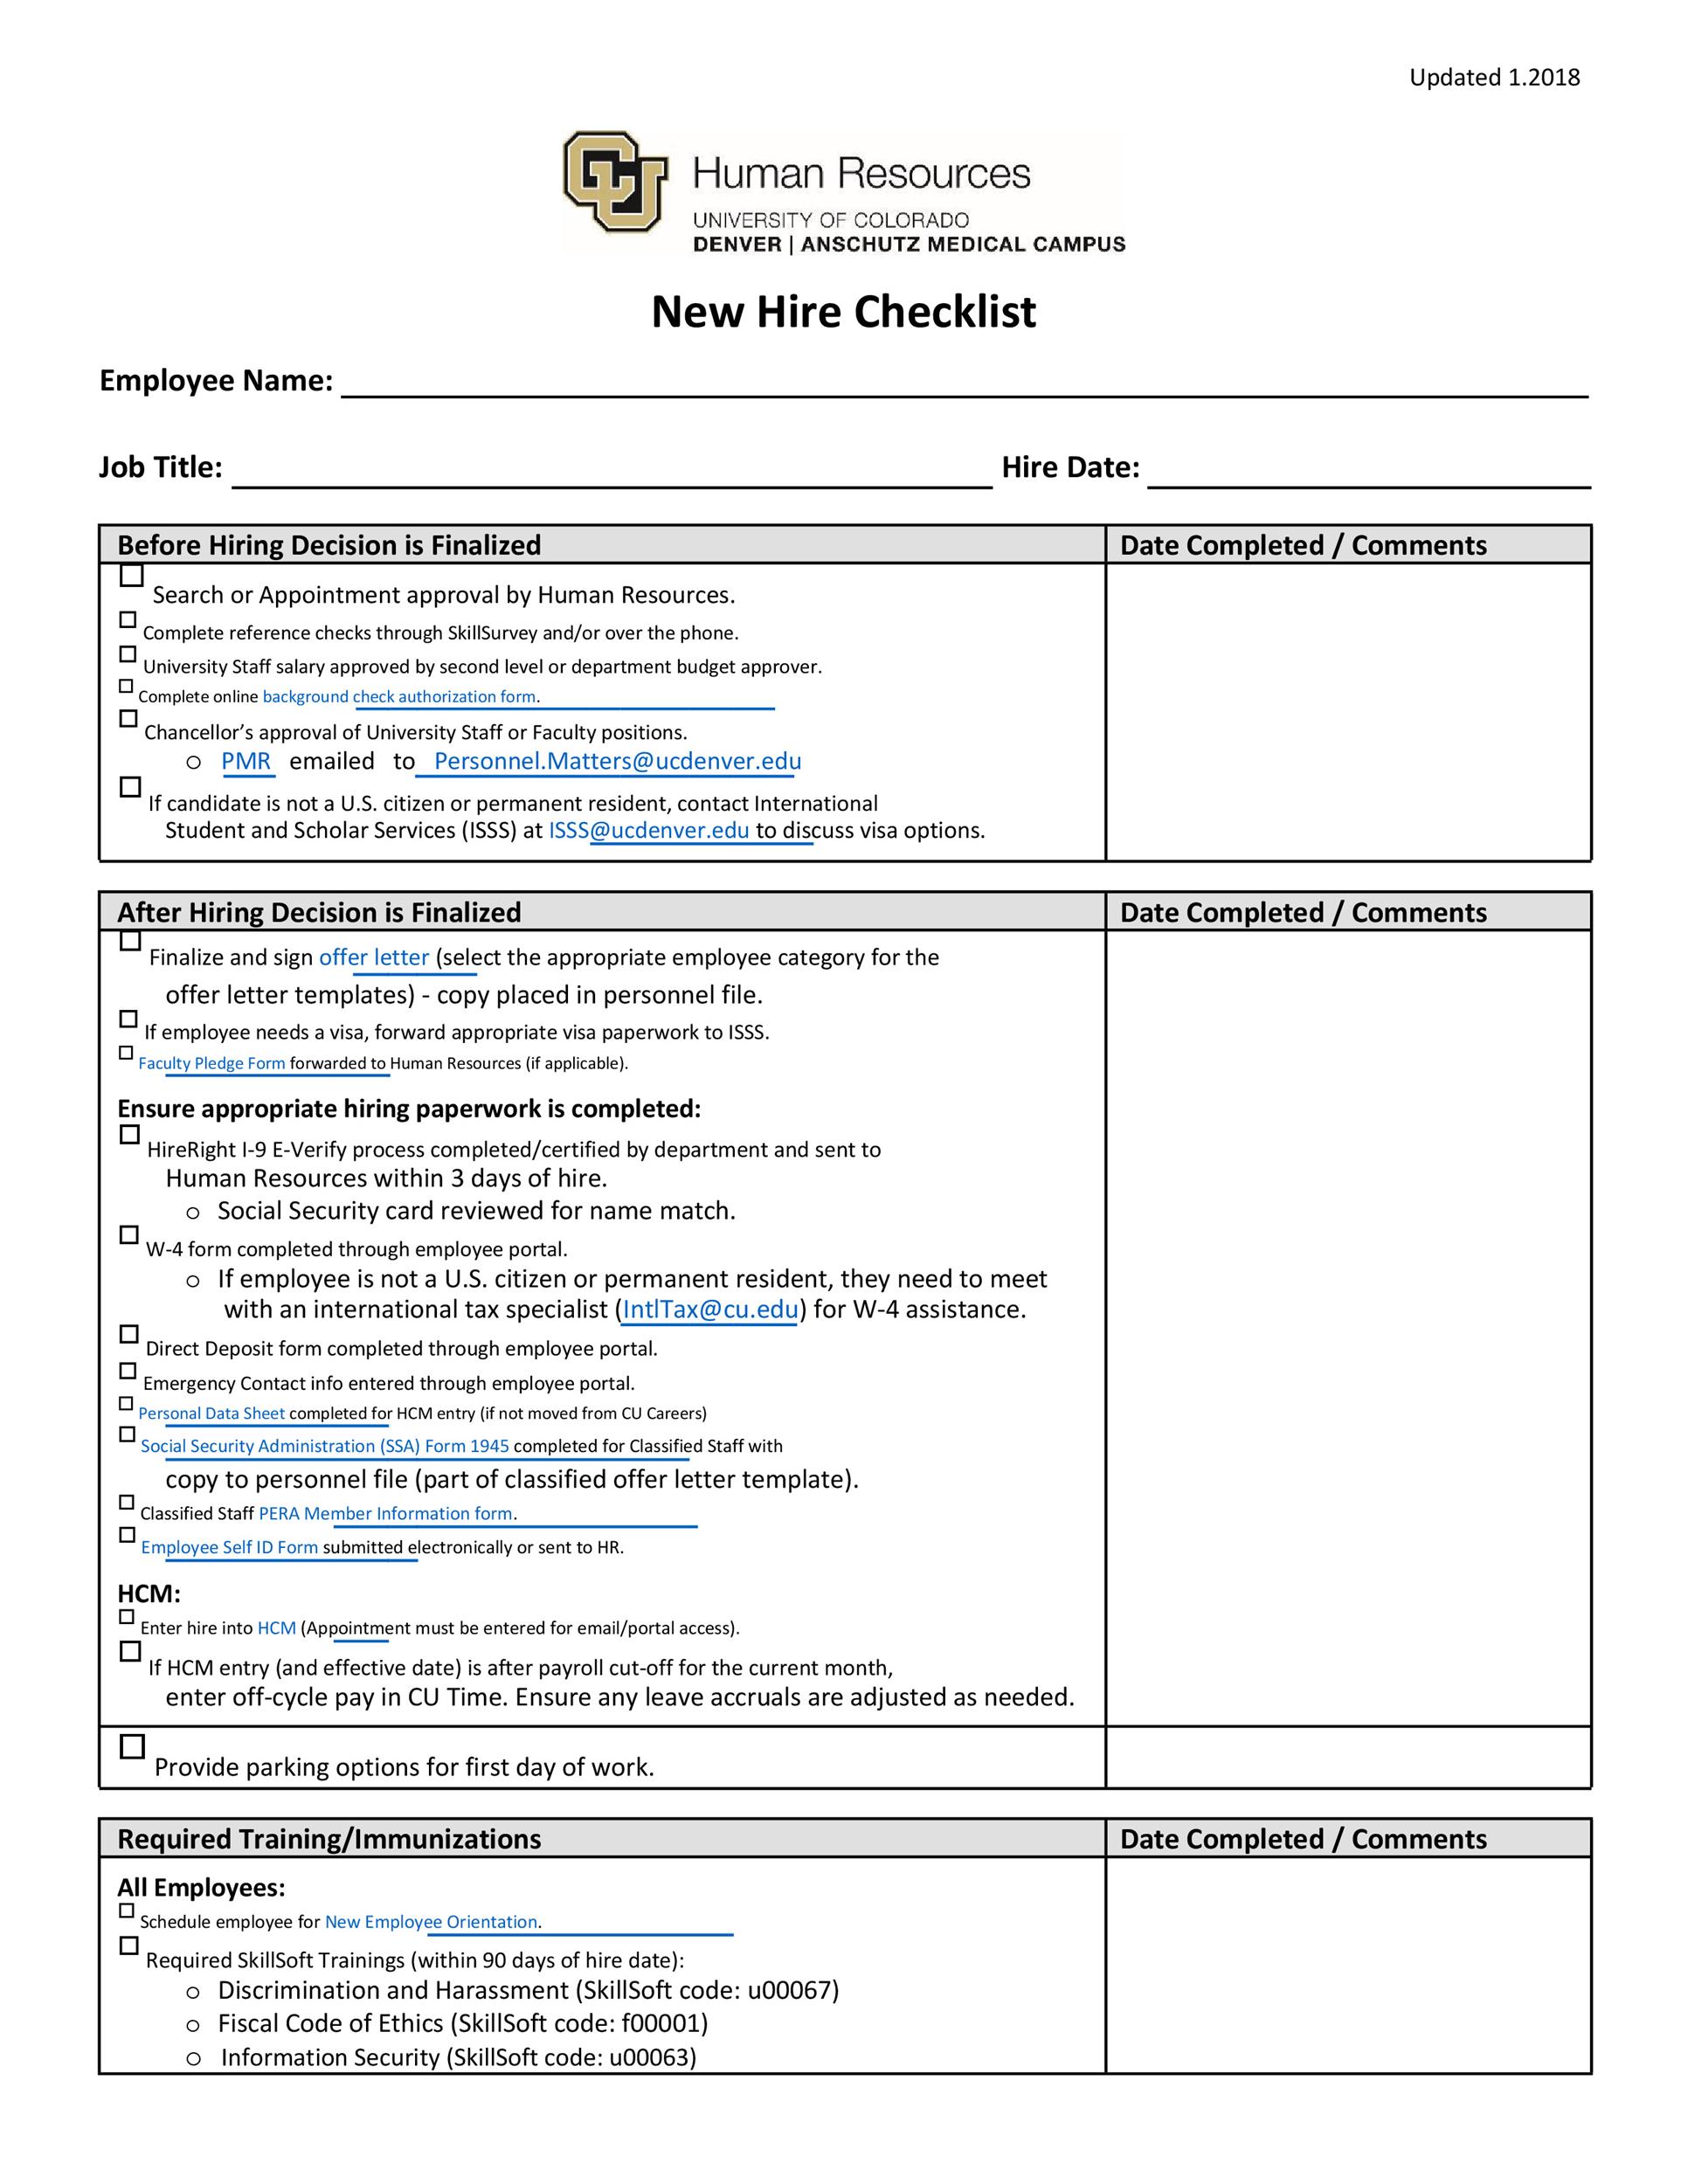 New Hire Packet Template TUTORE ORG Master of Documents